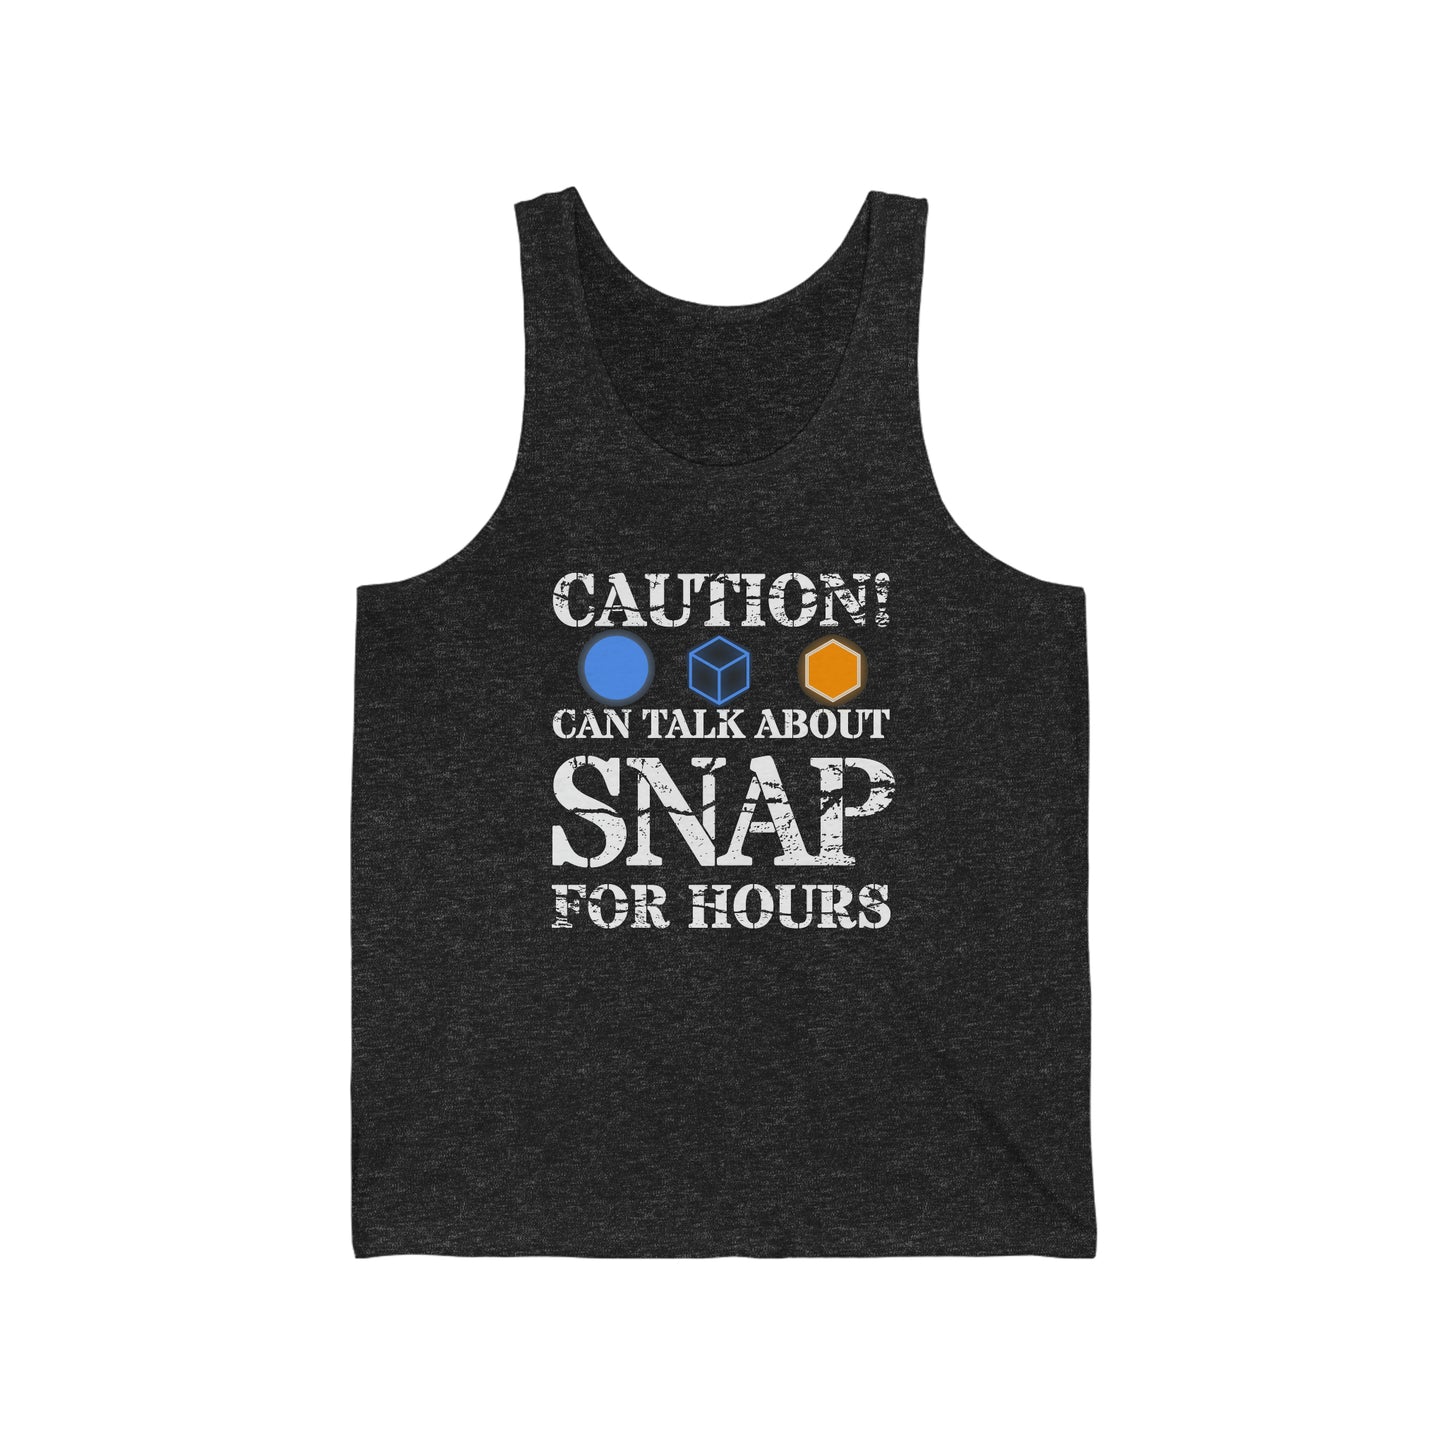 "caution - snap for hours" Marvel Snap Unisex Jersey Tank